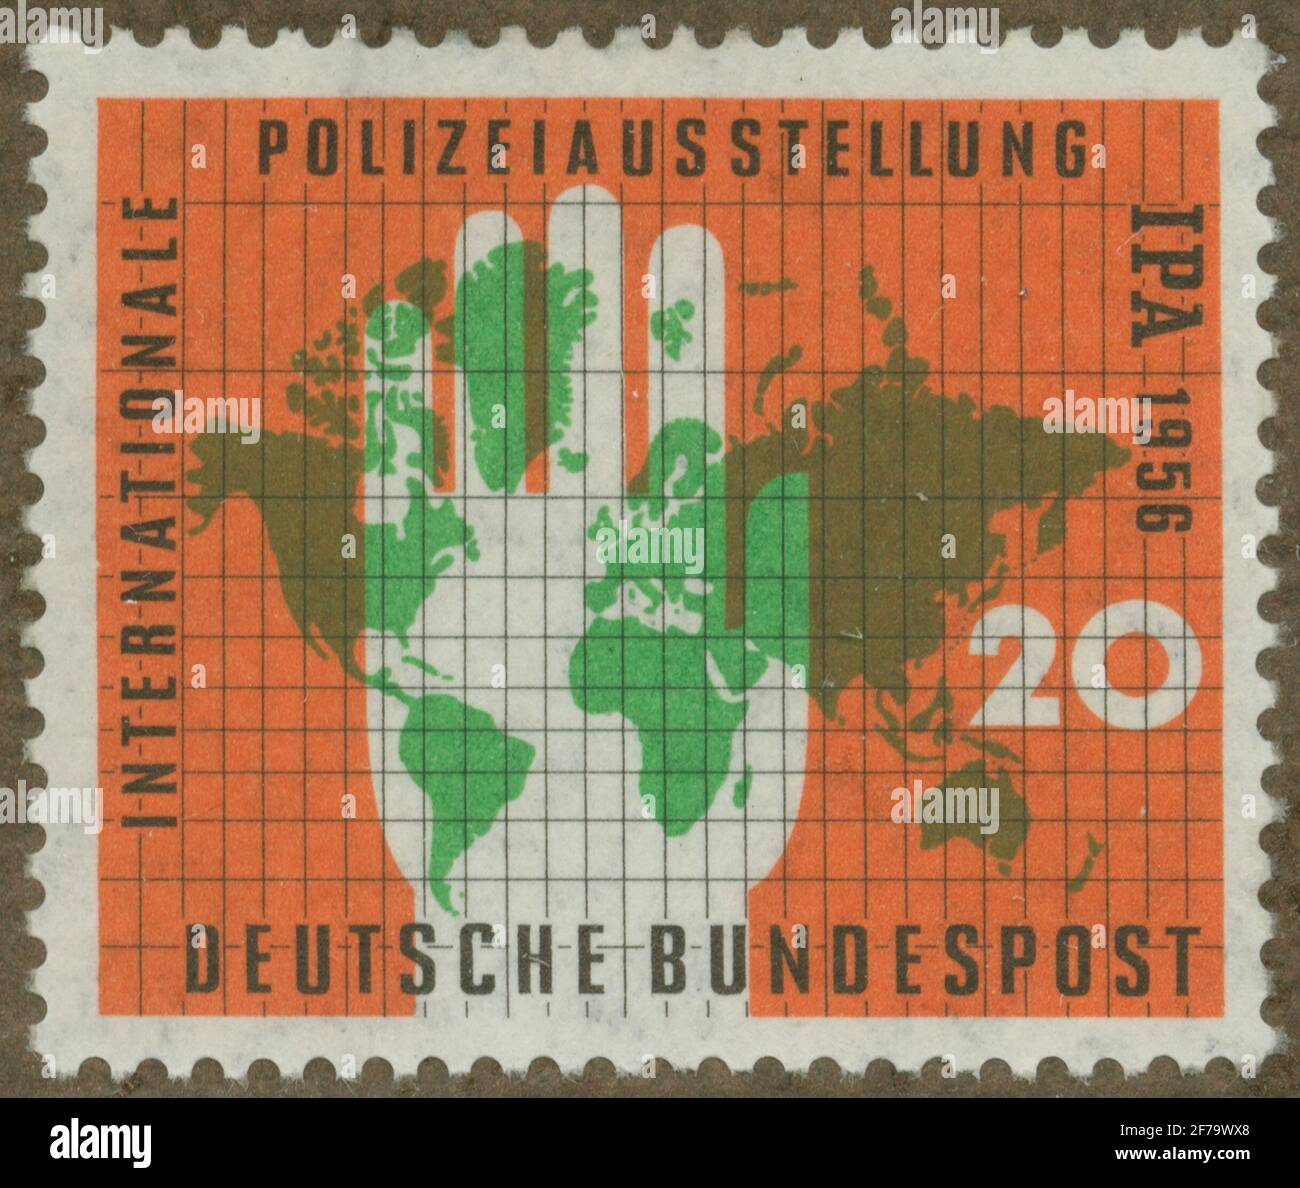 Stamp of Gösta Bodman's Philatelist Association, started in 1950.The stamp from West Germany, 1956. Motions of hand over world map. 'I. P. A. (Internat. Polizei Austellung in 1956). Stock Photo